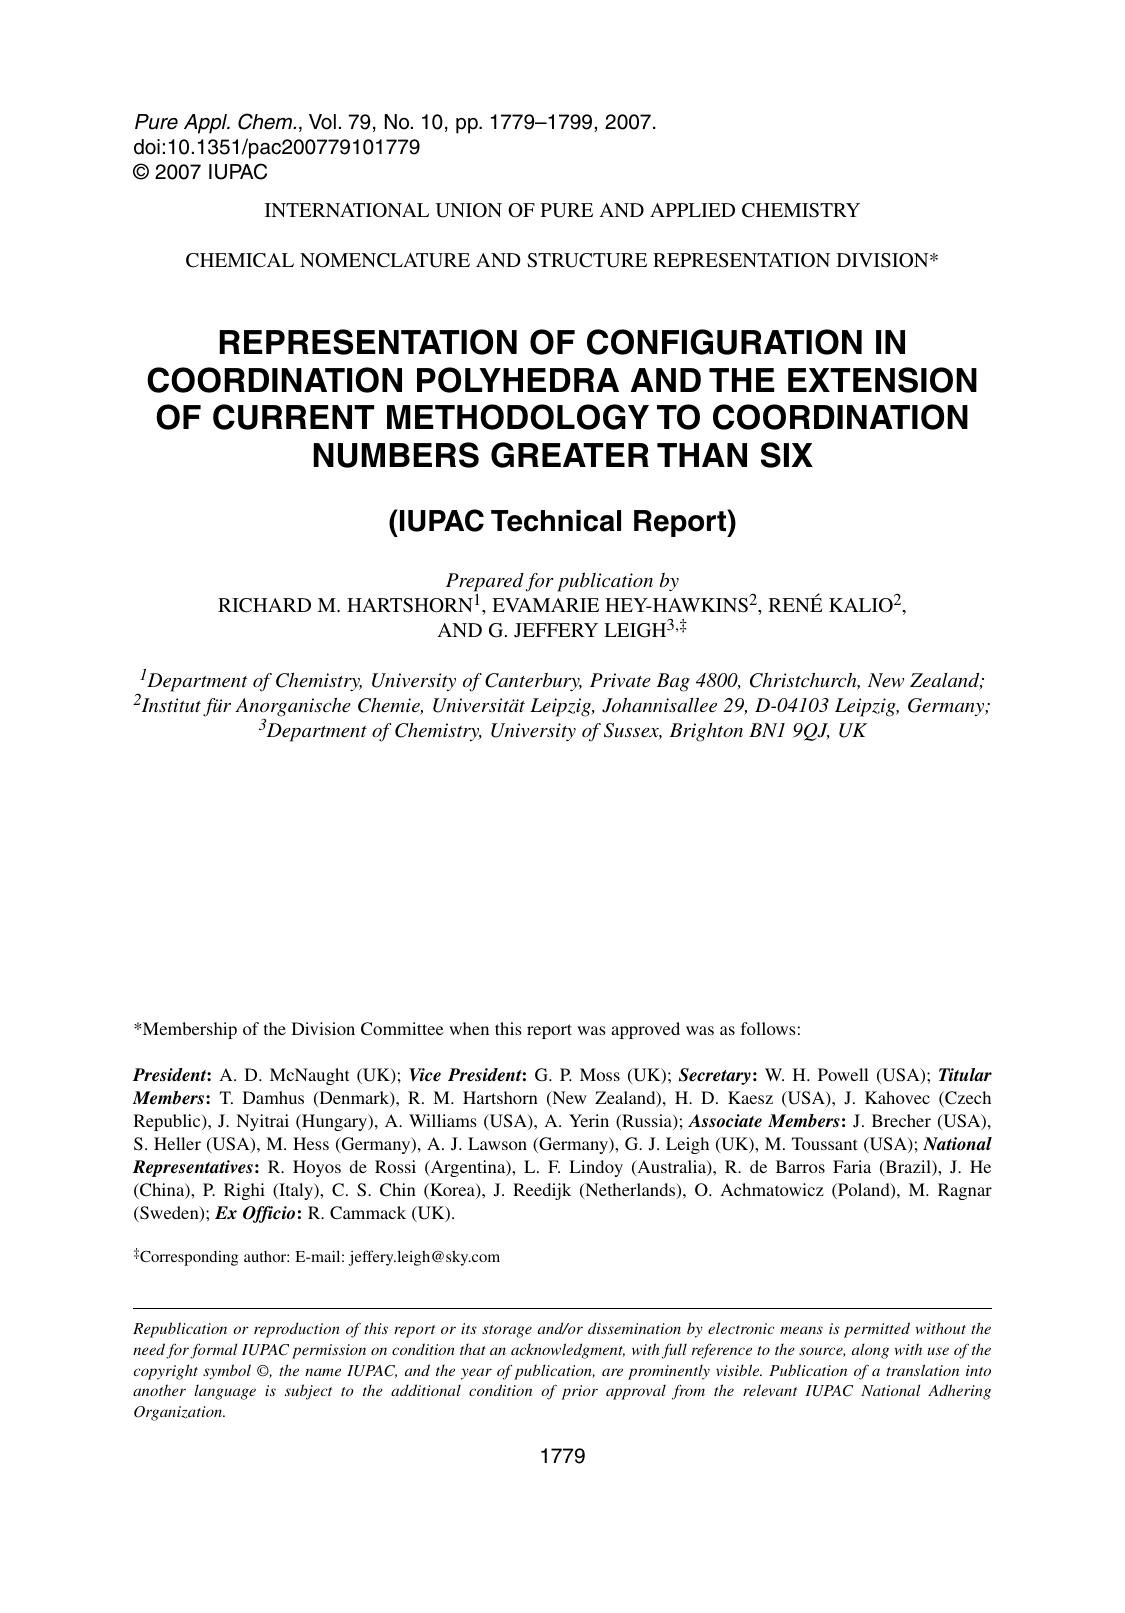 Representation of configuration in coordination polyhedra and the extension of current methodology to coordination numbers greater than six (IUPAC Technical Report) by Richard M. Hartshorn Evamarie Hey-Hawkins RenÃ© Kalio & G. Jeffery Leigh